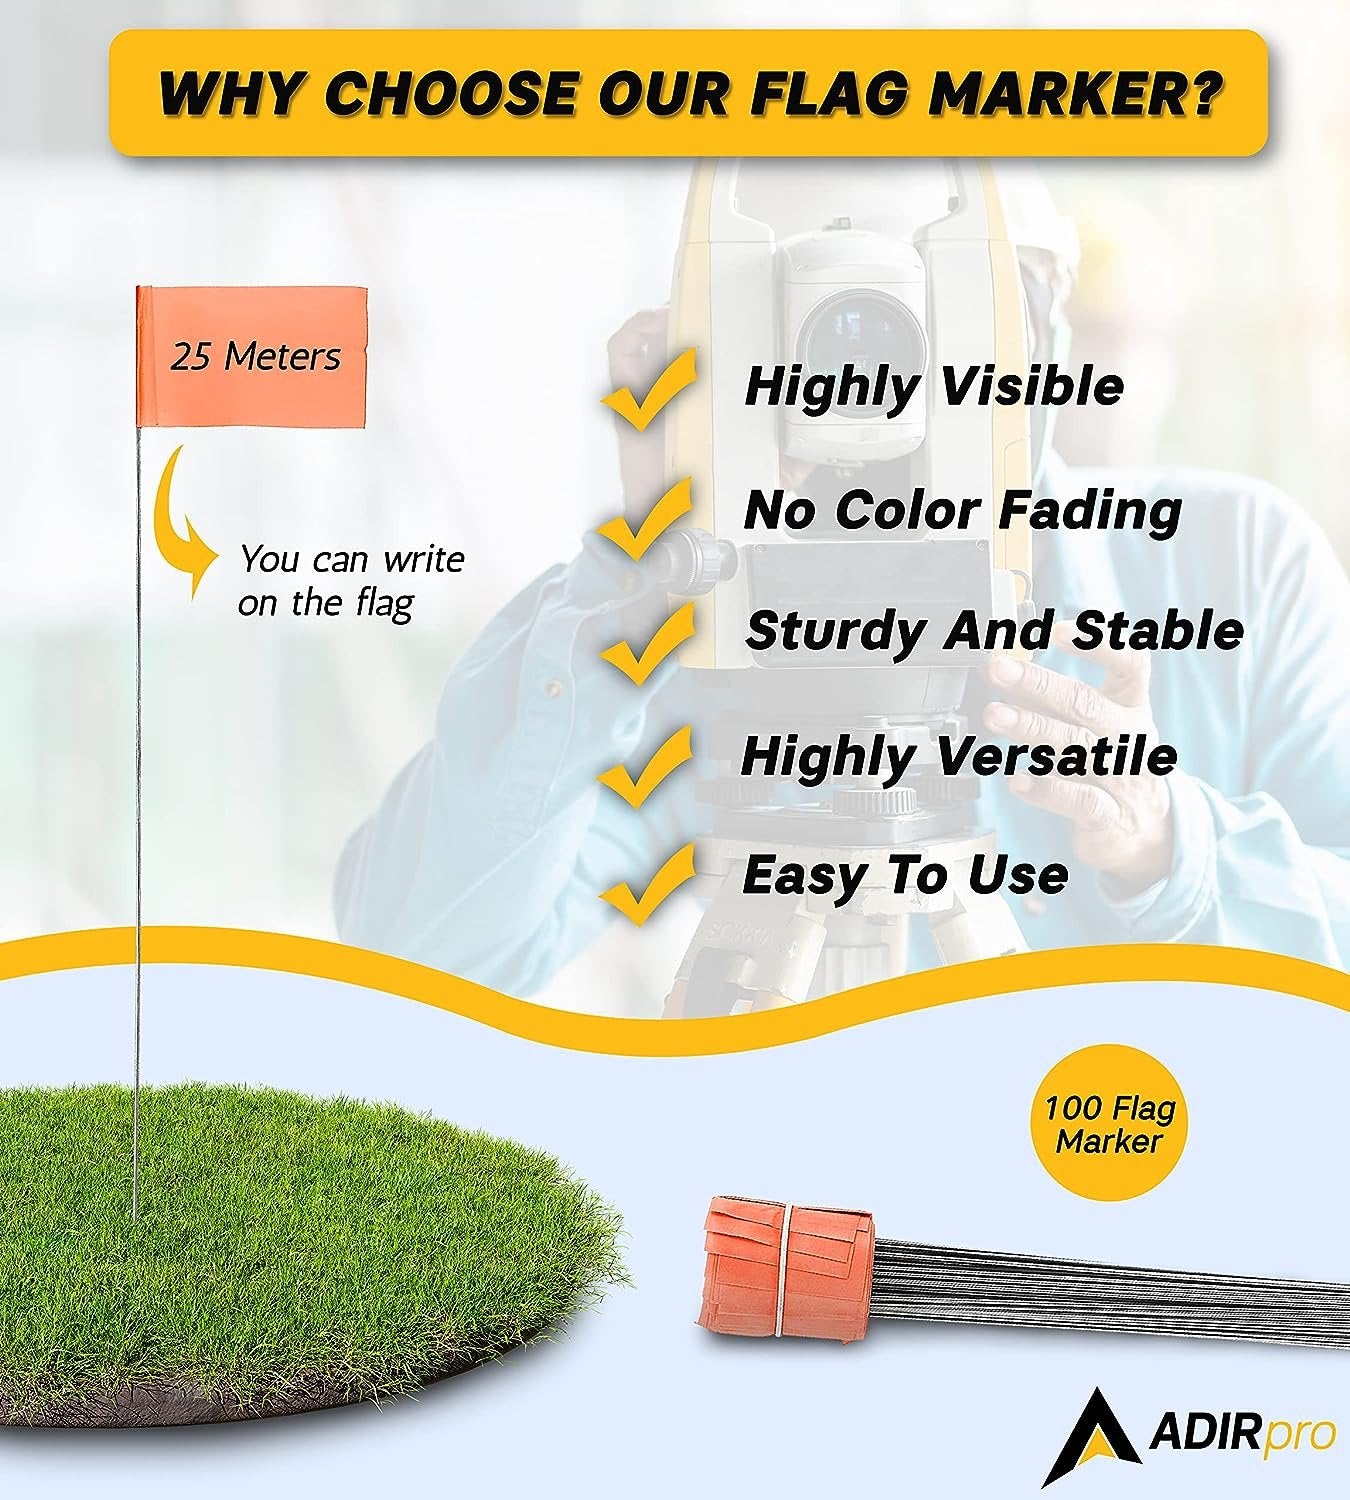 AdirPro Marking Flags 100 Pack - 2"x3" Lawn Flags - Marker Flags - Small & Thin Survey Flags - Flag Markers for Yard - Great for Ground Flags, Lawn Flags, Garden Flag Markers, Boundry Flags (Orange)